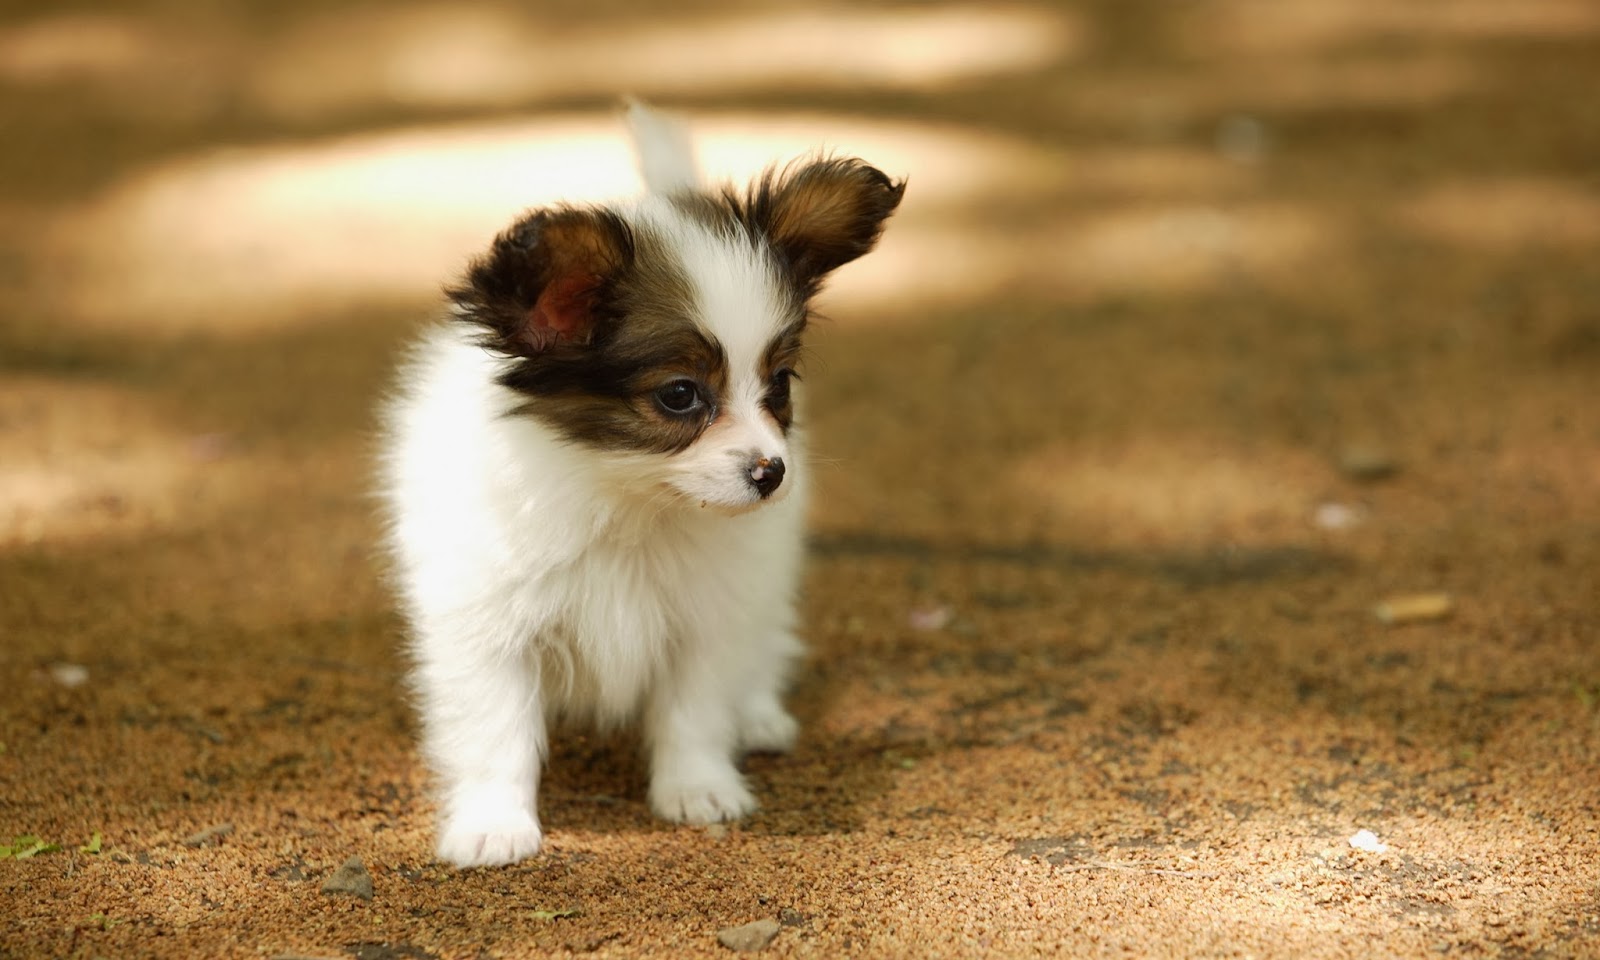 Puppy Photography 1080p Wallpapers | HD Wallpapers (High ...